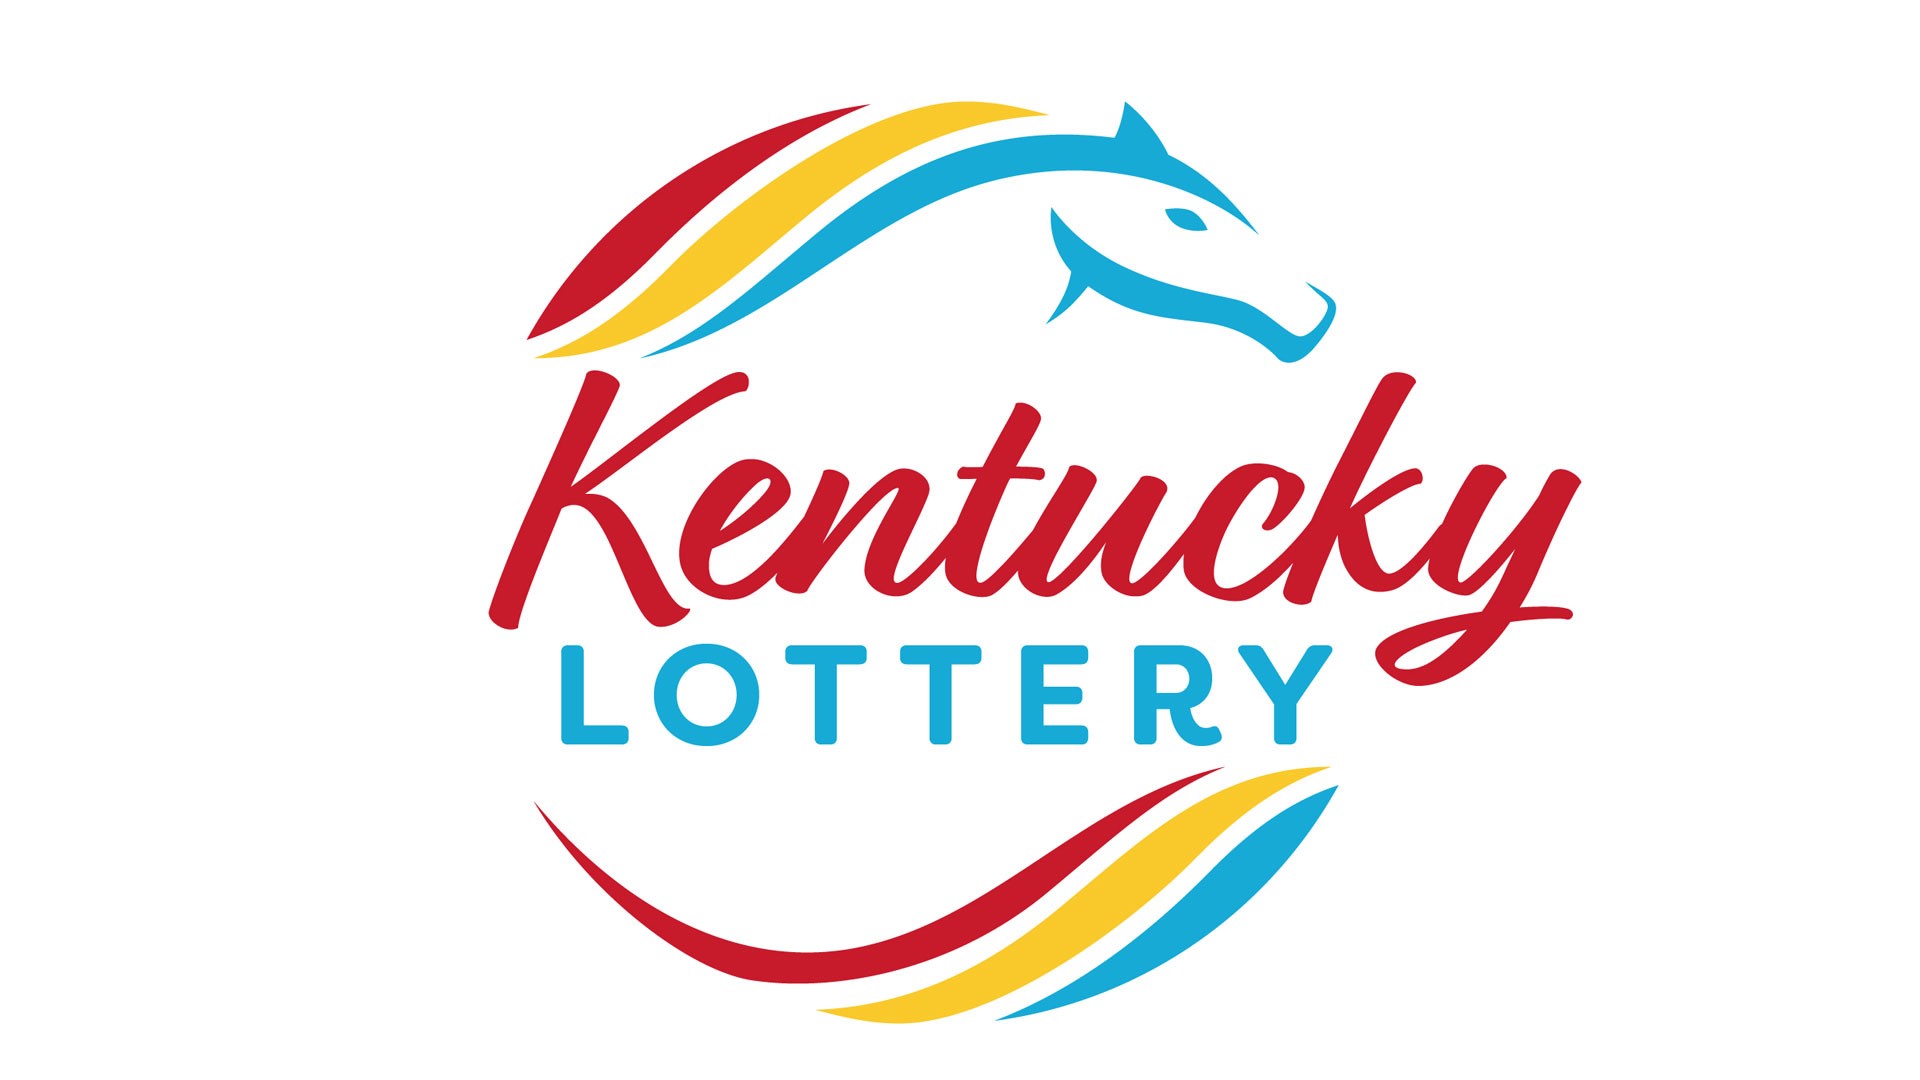 Since they opened their doors in 1989, they've given close to $5 billion back to the Commonwealth. From kindergarten to college, the Kentucky Lottery helps fund educational programs and pay for scholarships and grants for students across the state.